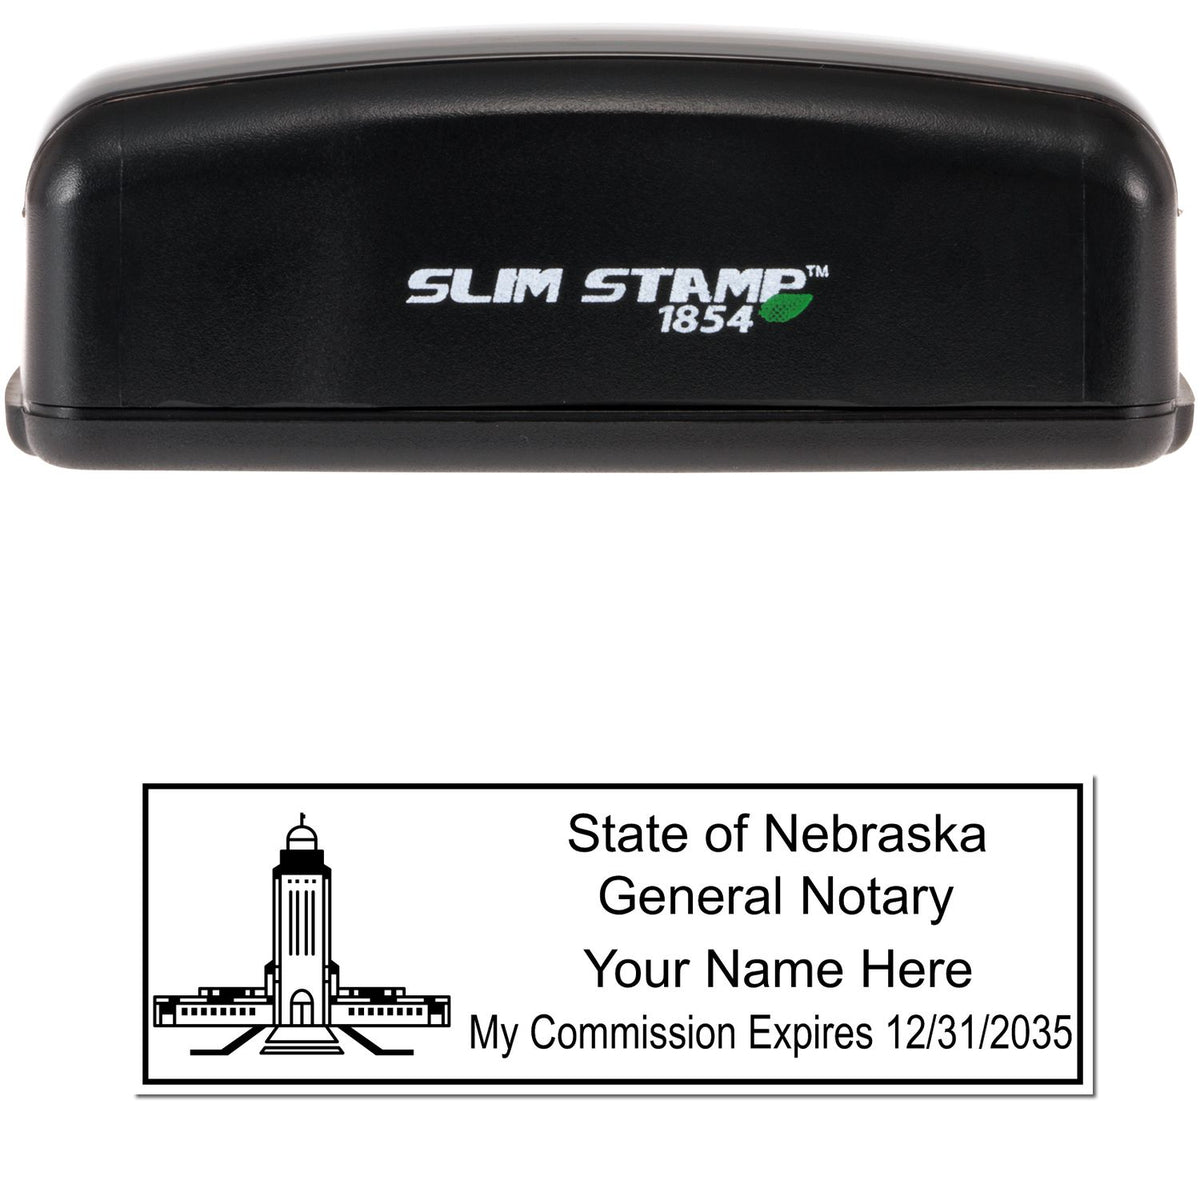 The main image for the Slim Pre-Inked State Seal Notary Stamp for Nebraska depicting a sample of the imprint and electronic files